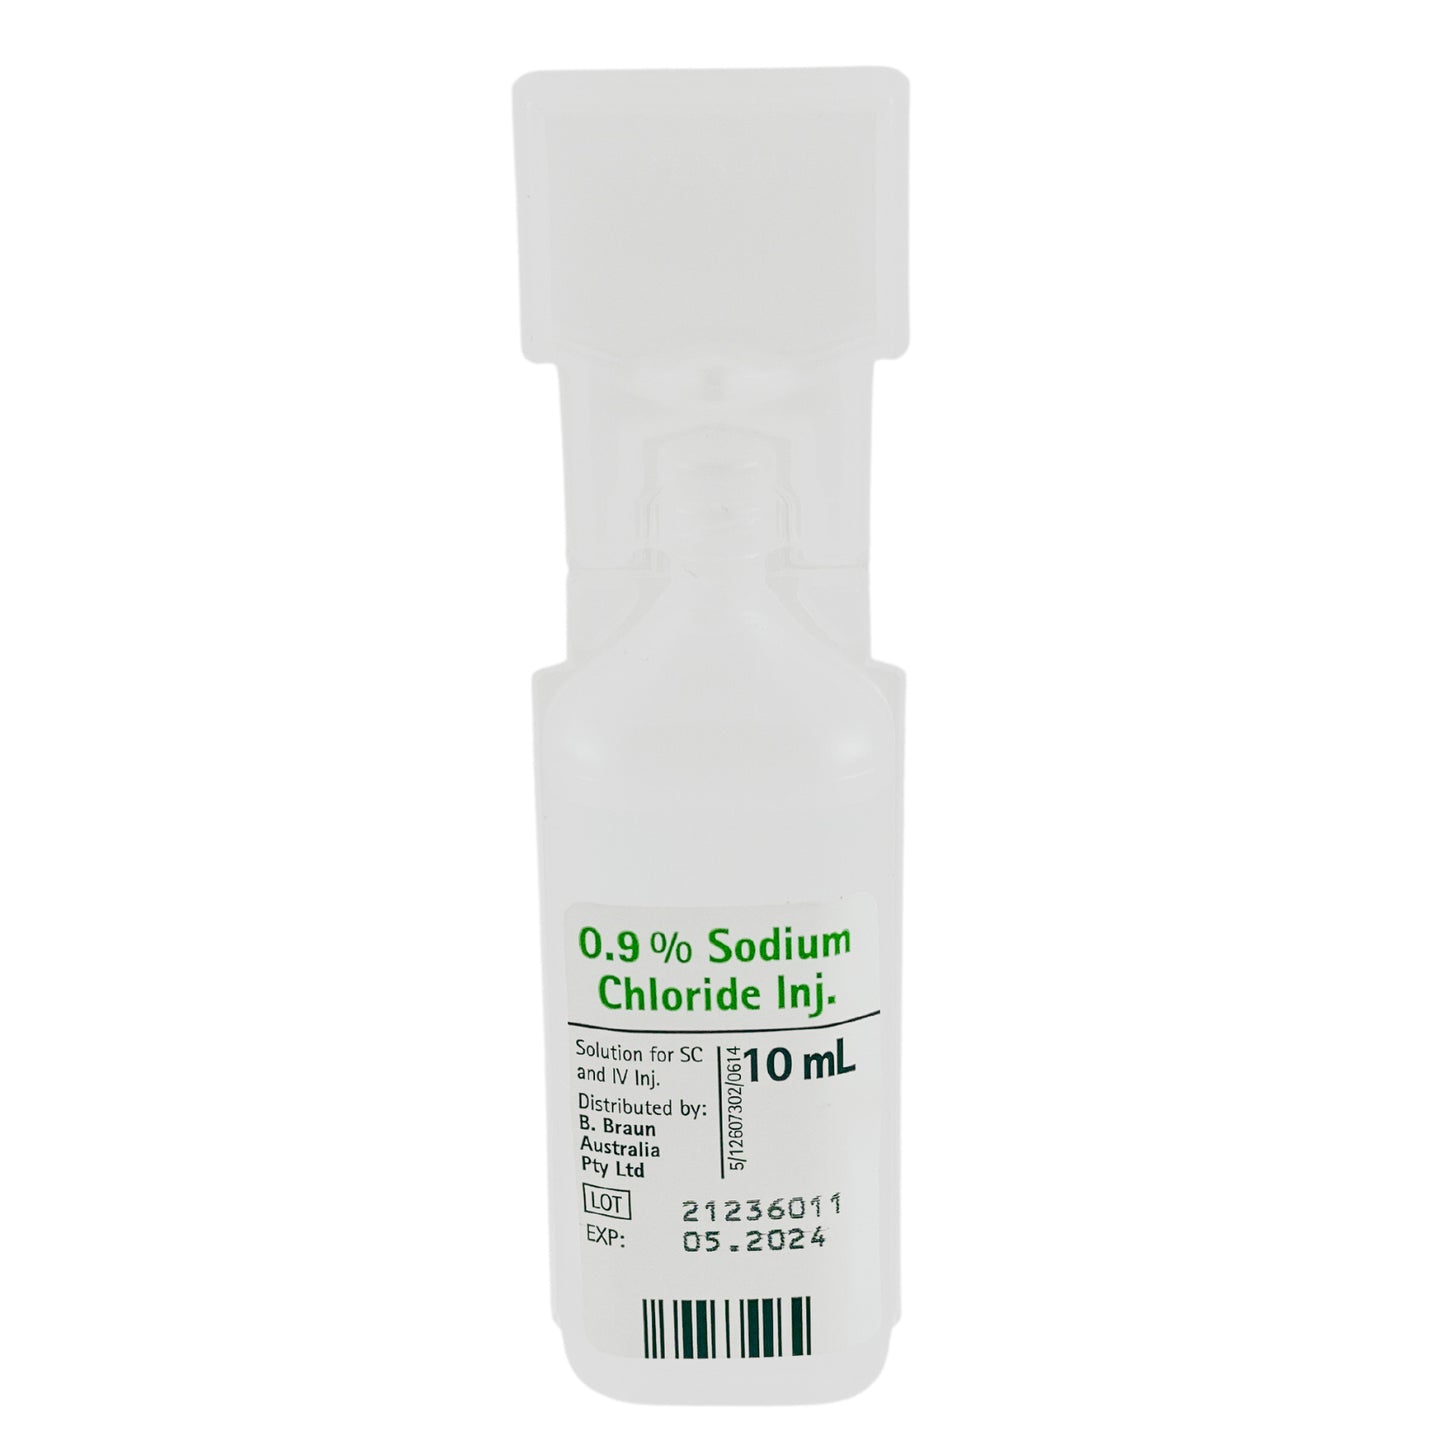 Sodium Chloride For Injection 10ml Box (20)